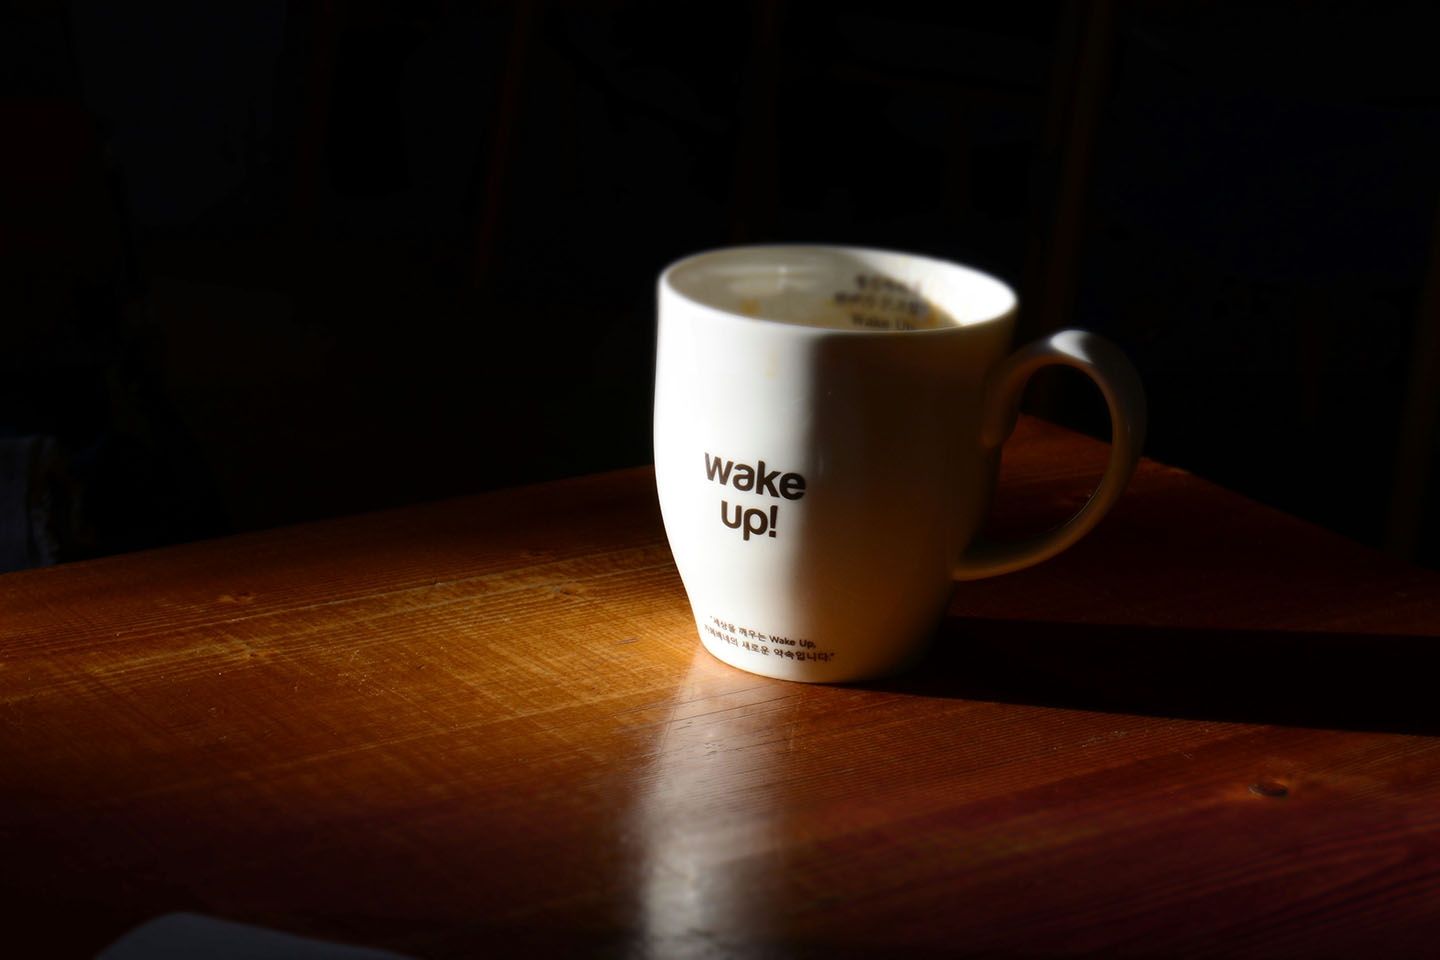 White coffee cup, against a black background on a wooden surface. Cup reads "wake up" in black letters on the front.